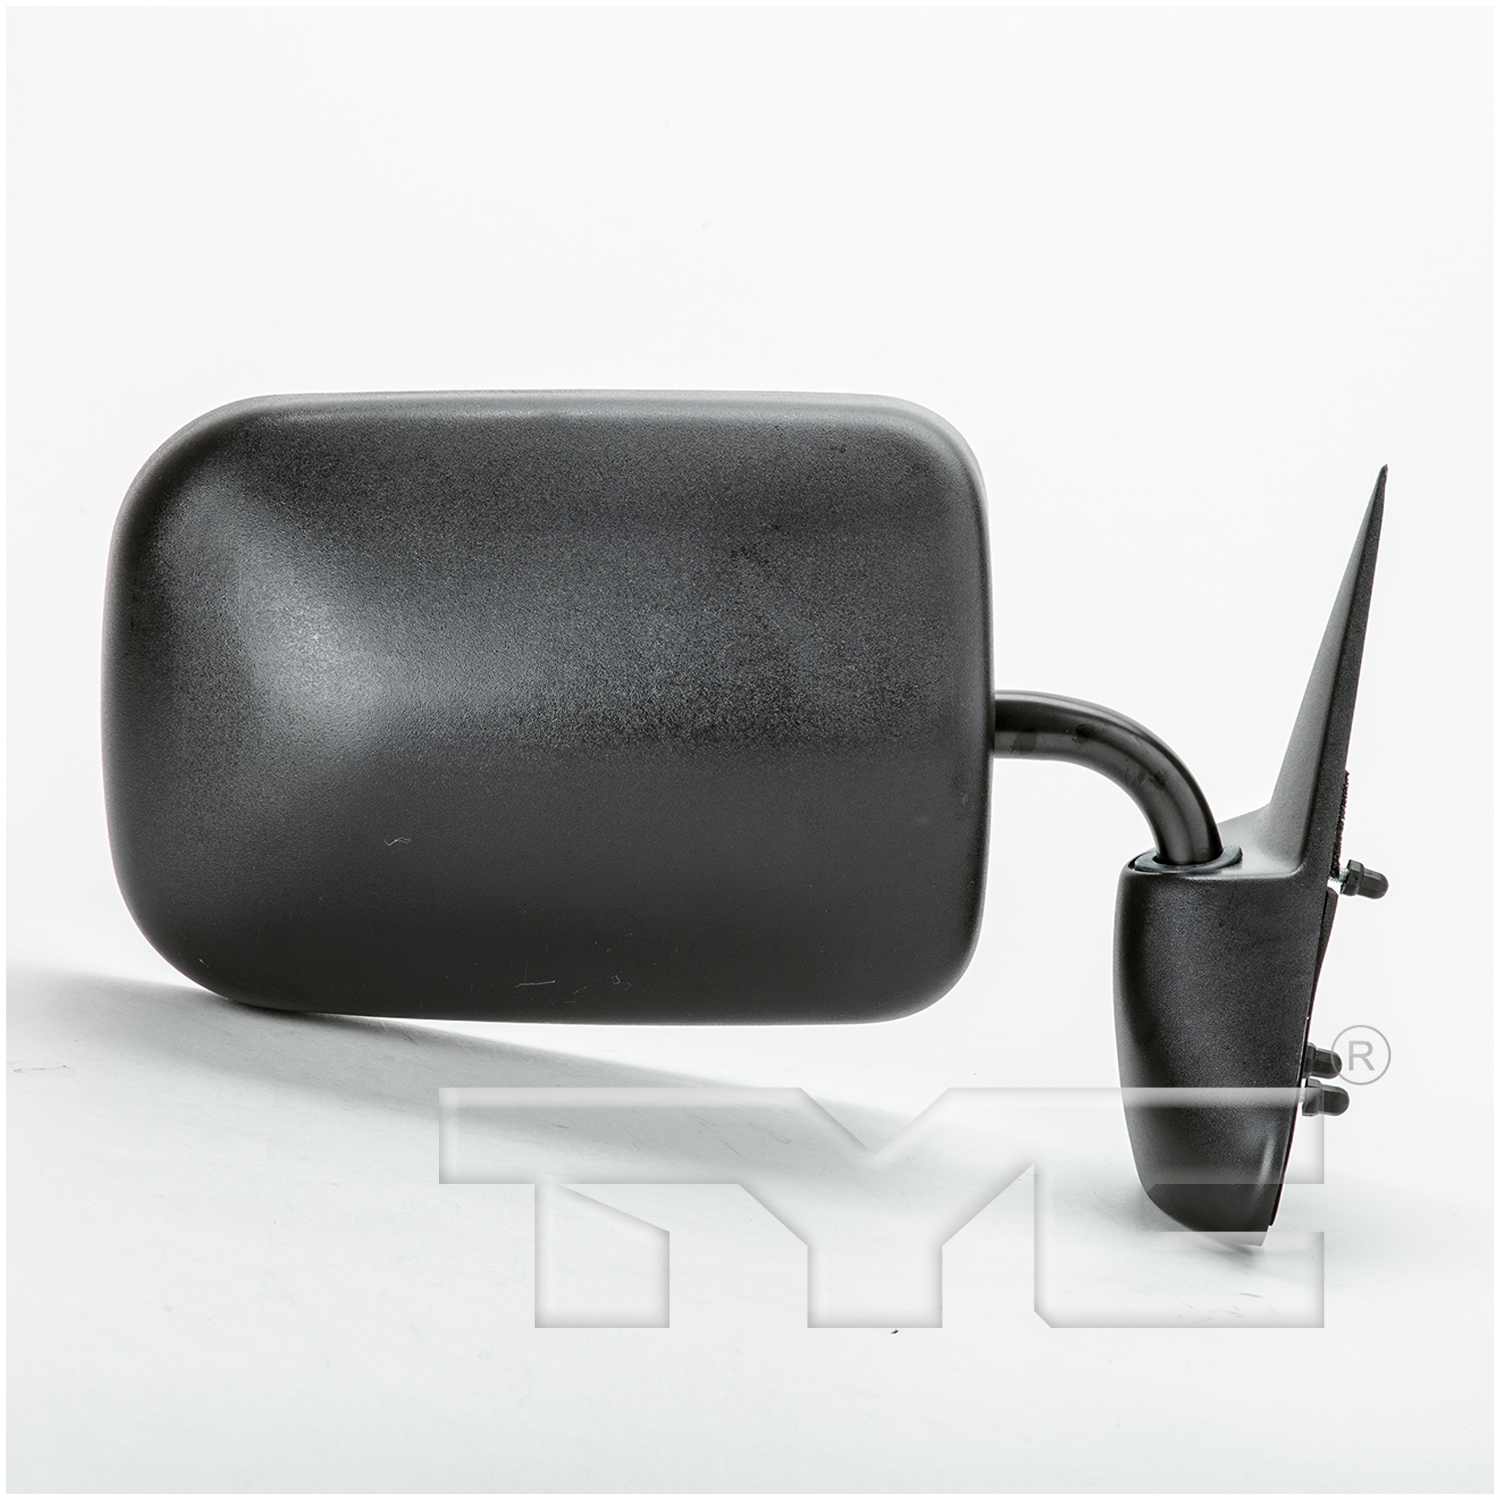 Aftermarket MIRRORS for DODGE - RAM 1500, RAM 1500,94-97,RT Mirror outside rear view